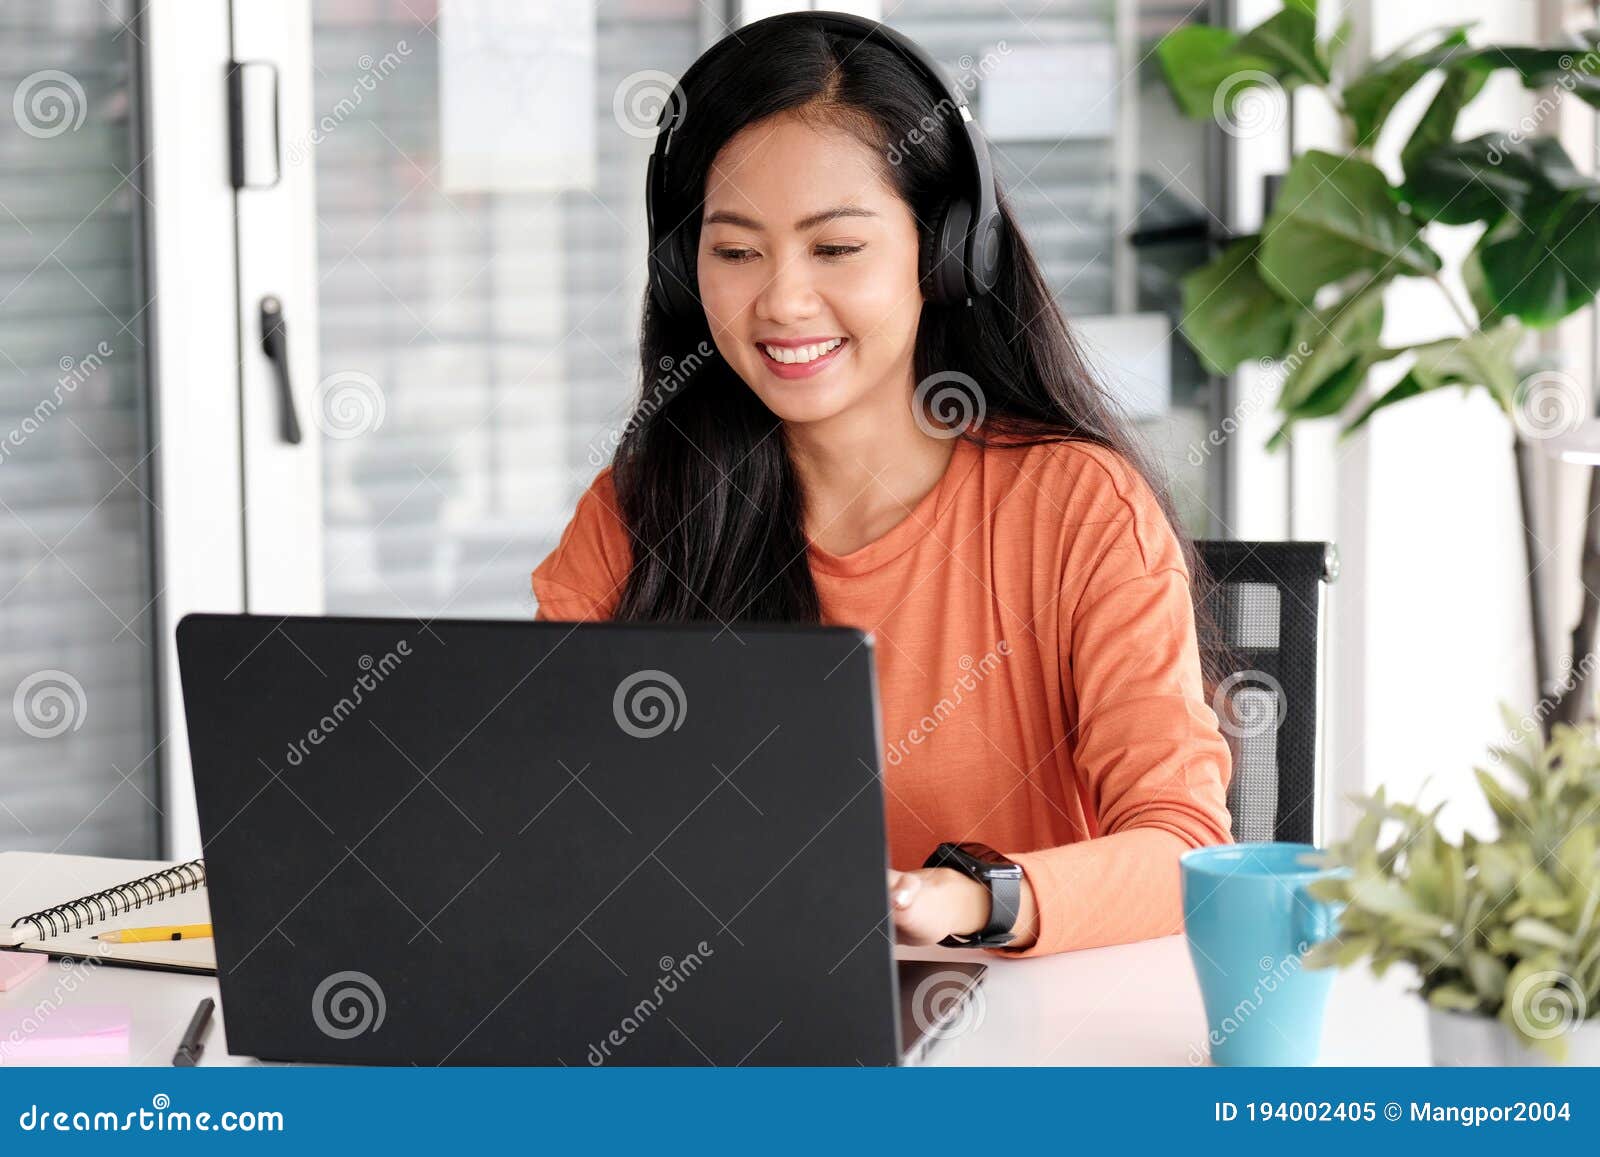 video conference, work from home, asian woman making video call to business team with virtual web, contacting asia colleagues